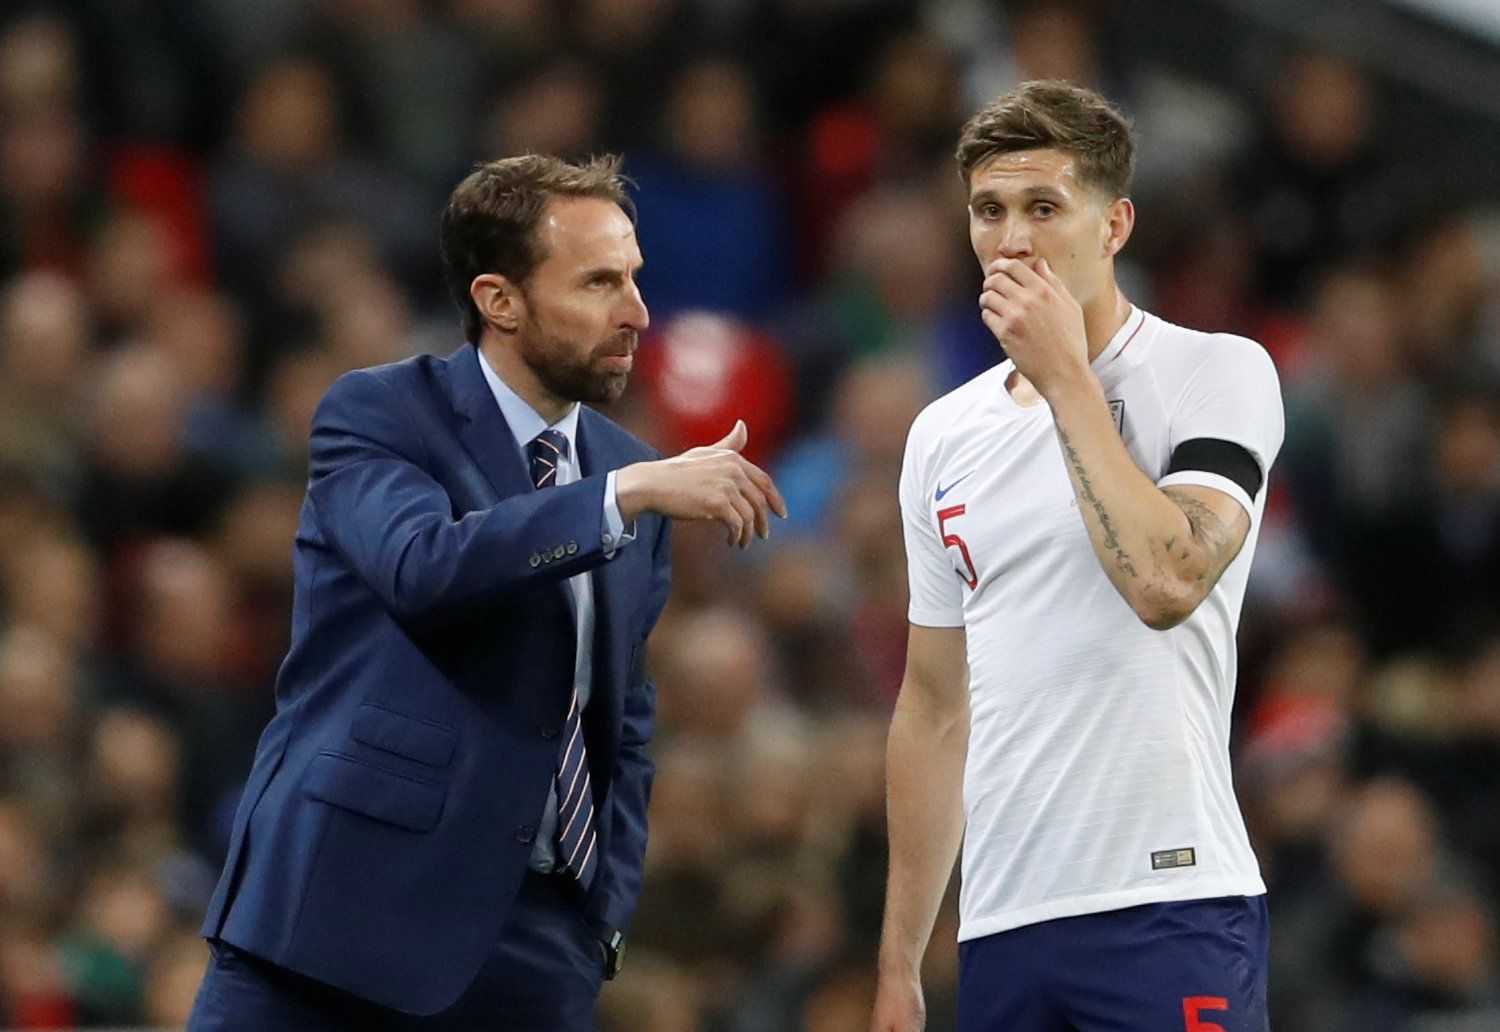 Soccer Football - International Friendly - England vs Italy - Wembley Stadium, London, Britain - March 27, 2018   England manager Gareth Southgate and John Stones         Action Images via Reuters/Carl Recine